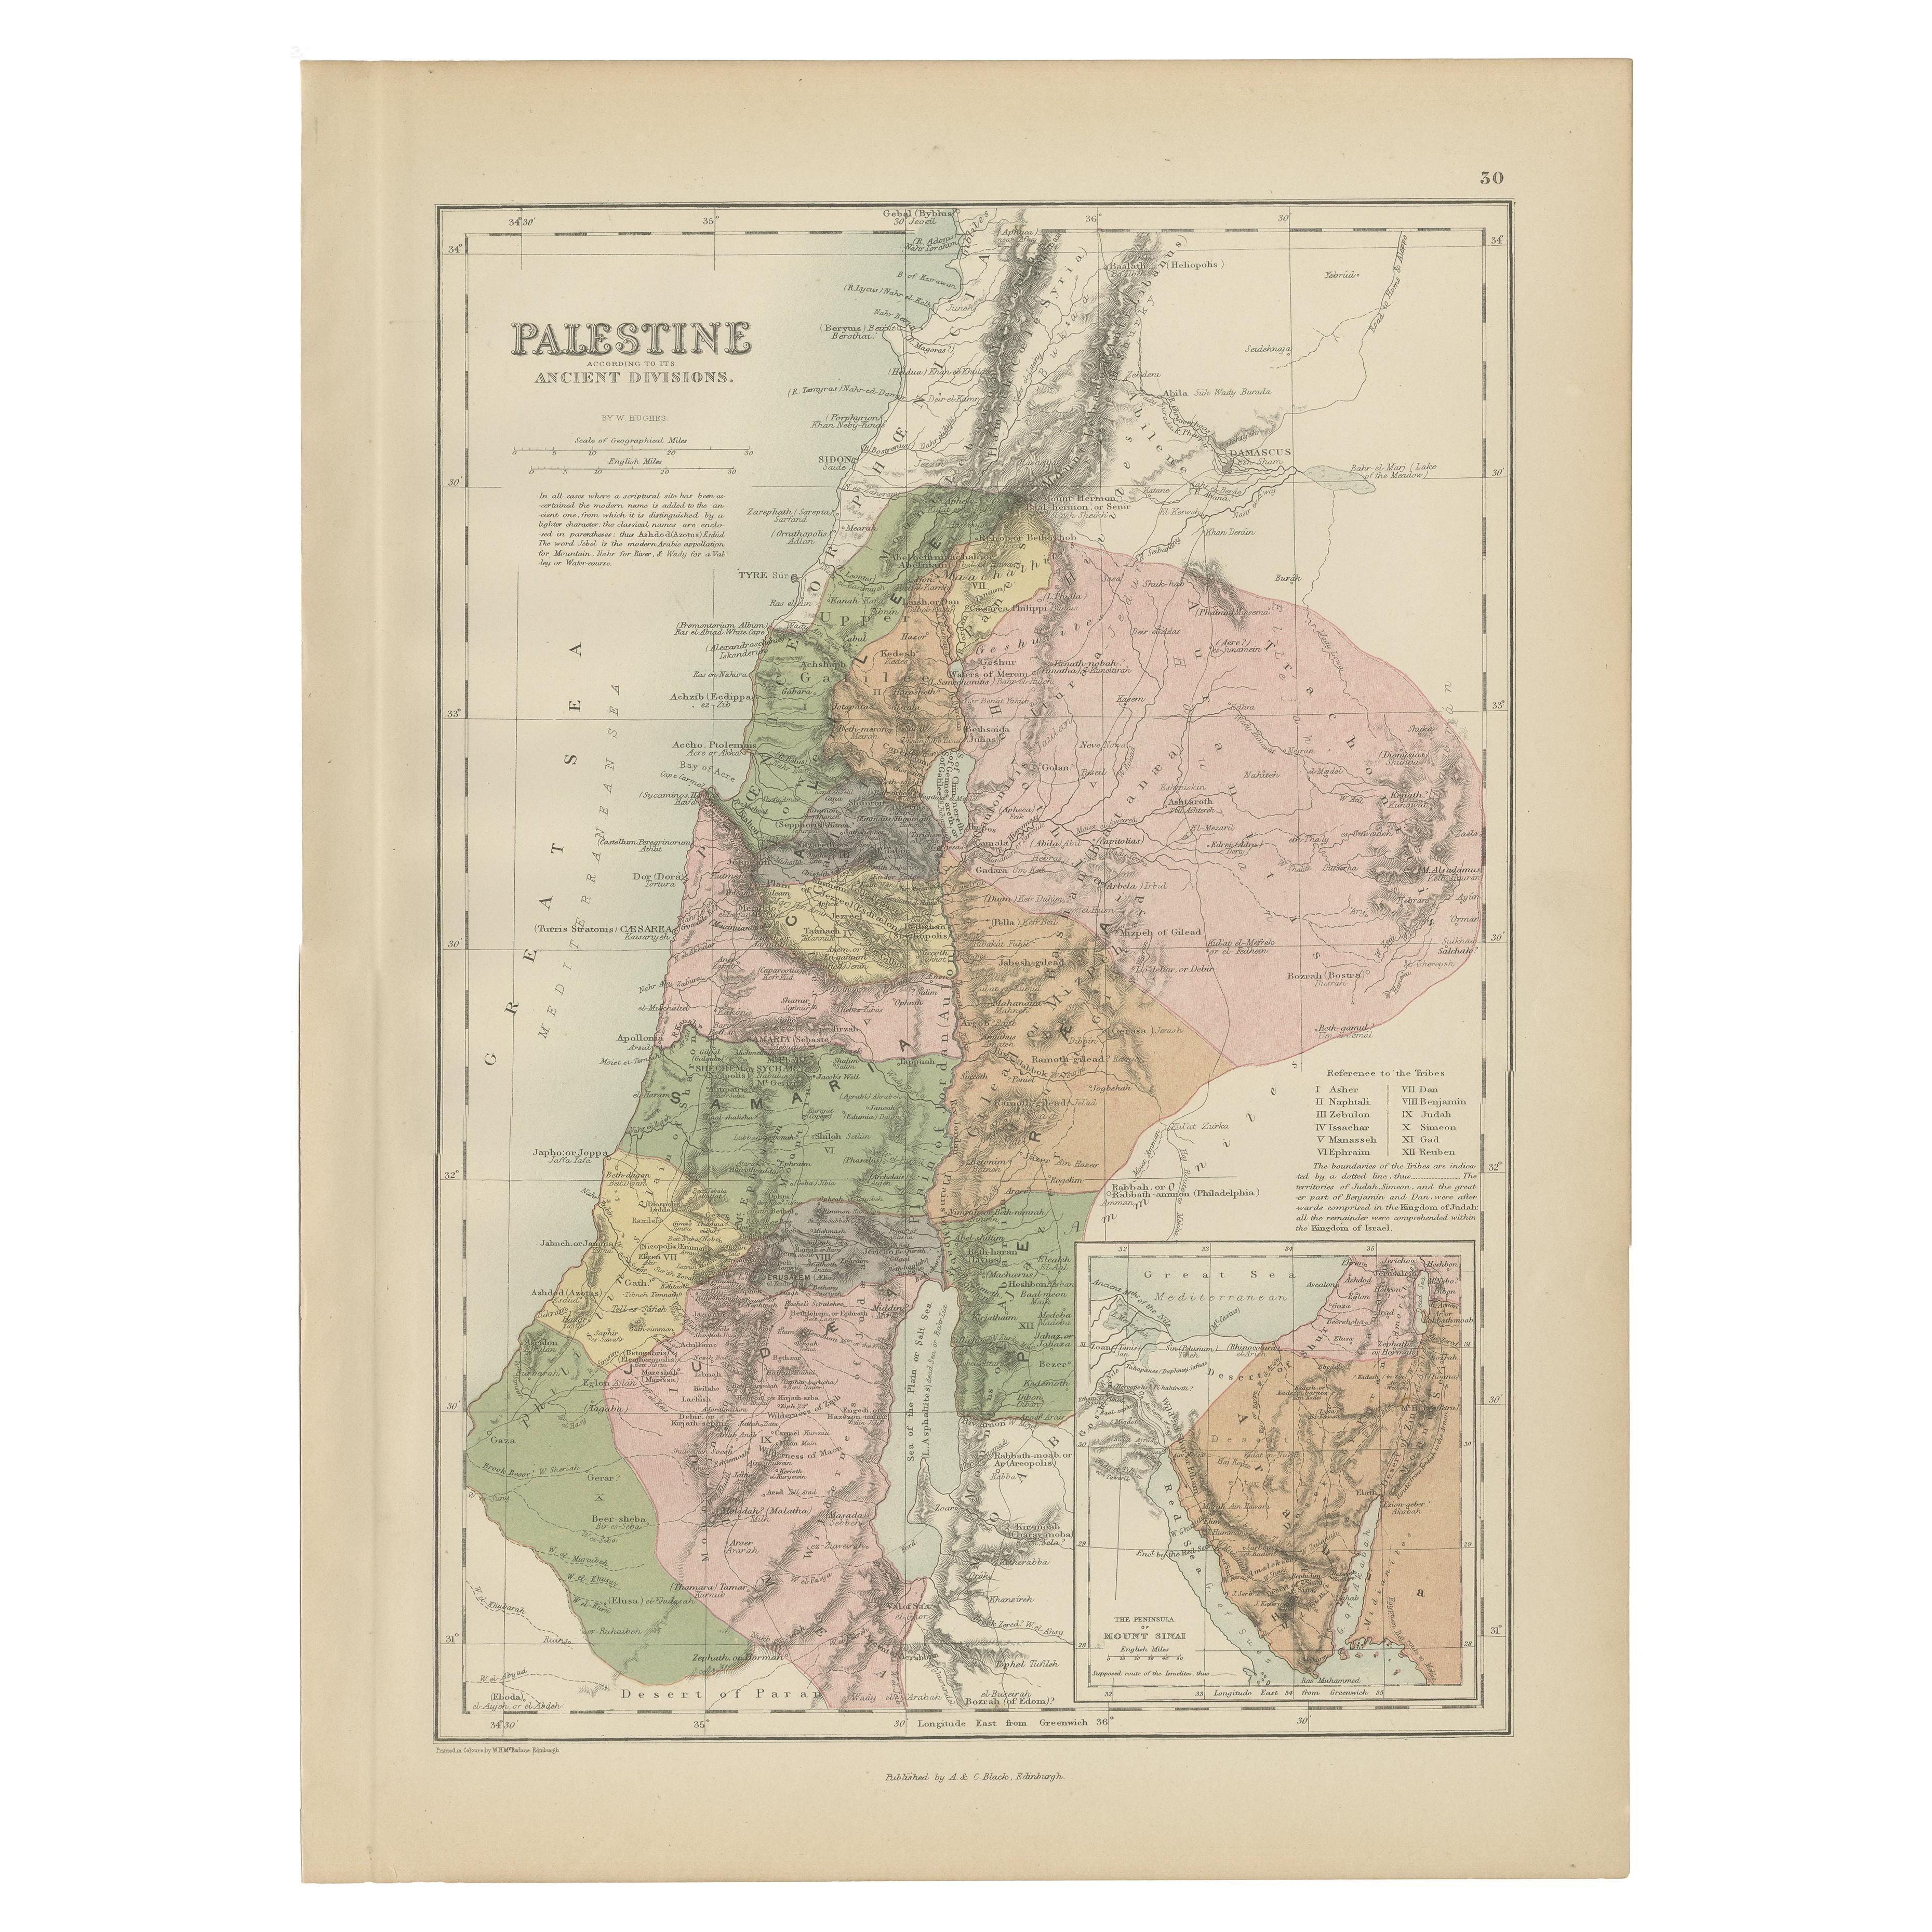 Antique Map of Palestine by A & C. Black, 1870